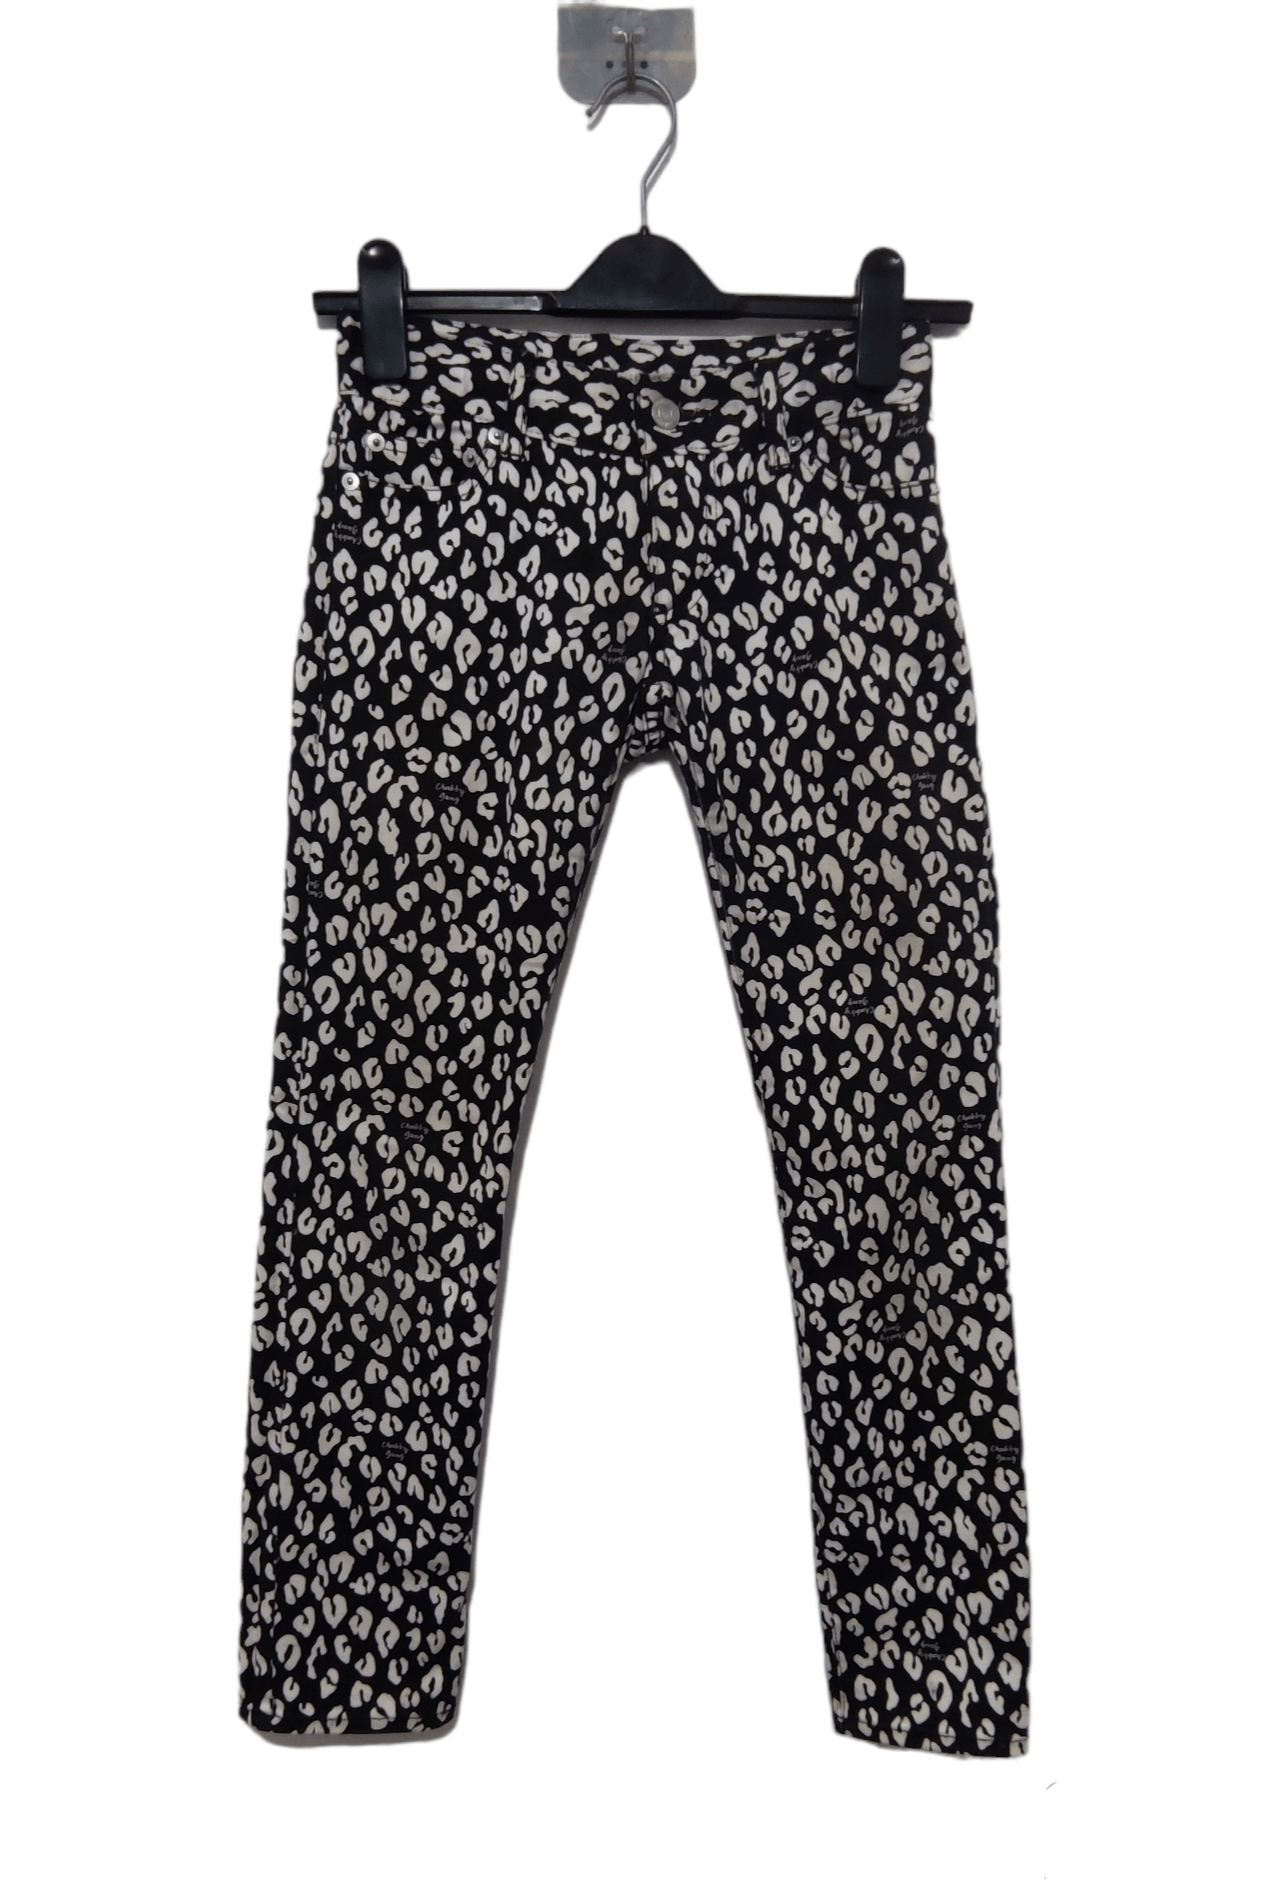 Hysteric Glamour Chubby Gang Pants | Grailed